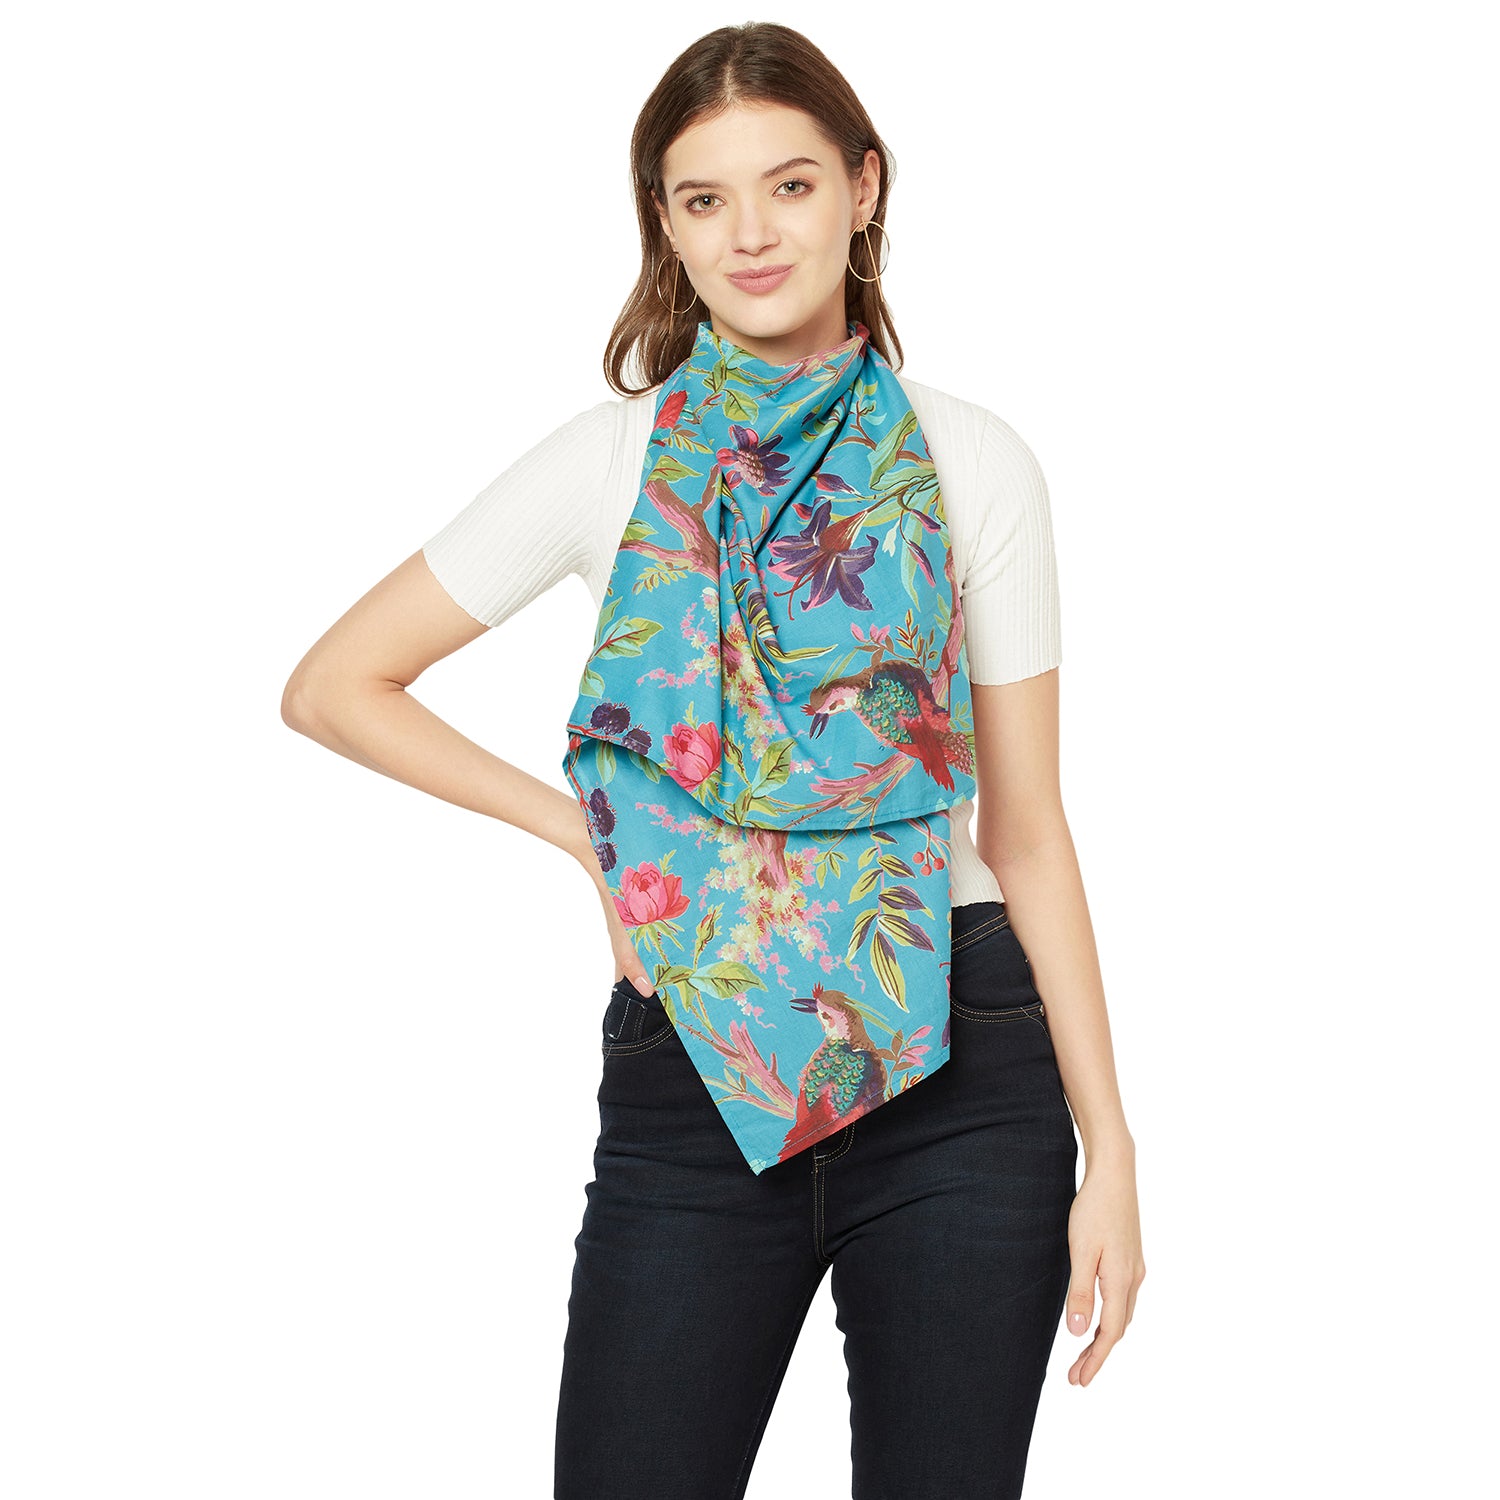 'Blooming Beauty' 100% Cotton Scarf